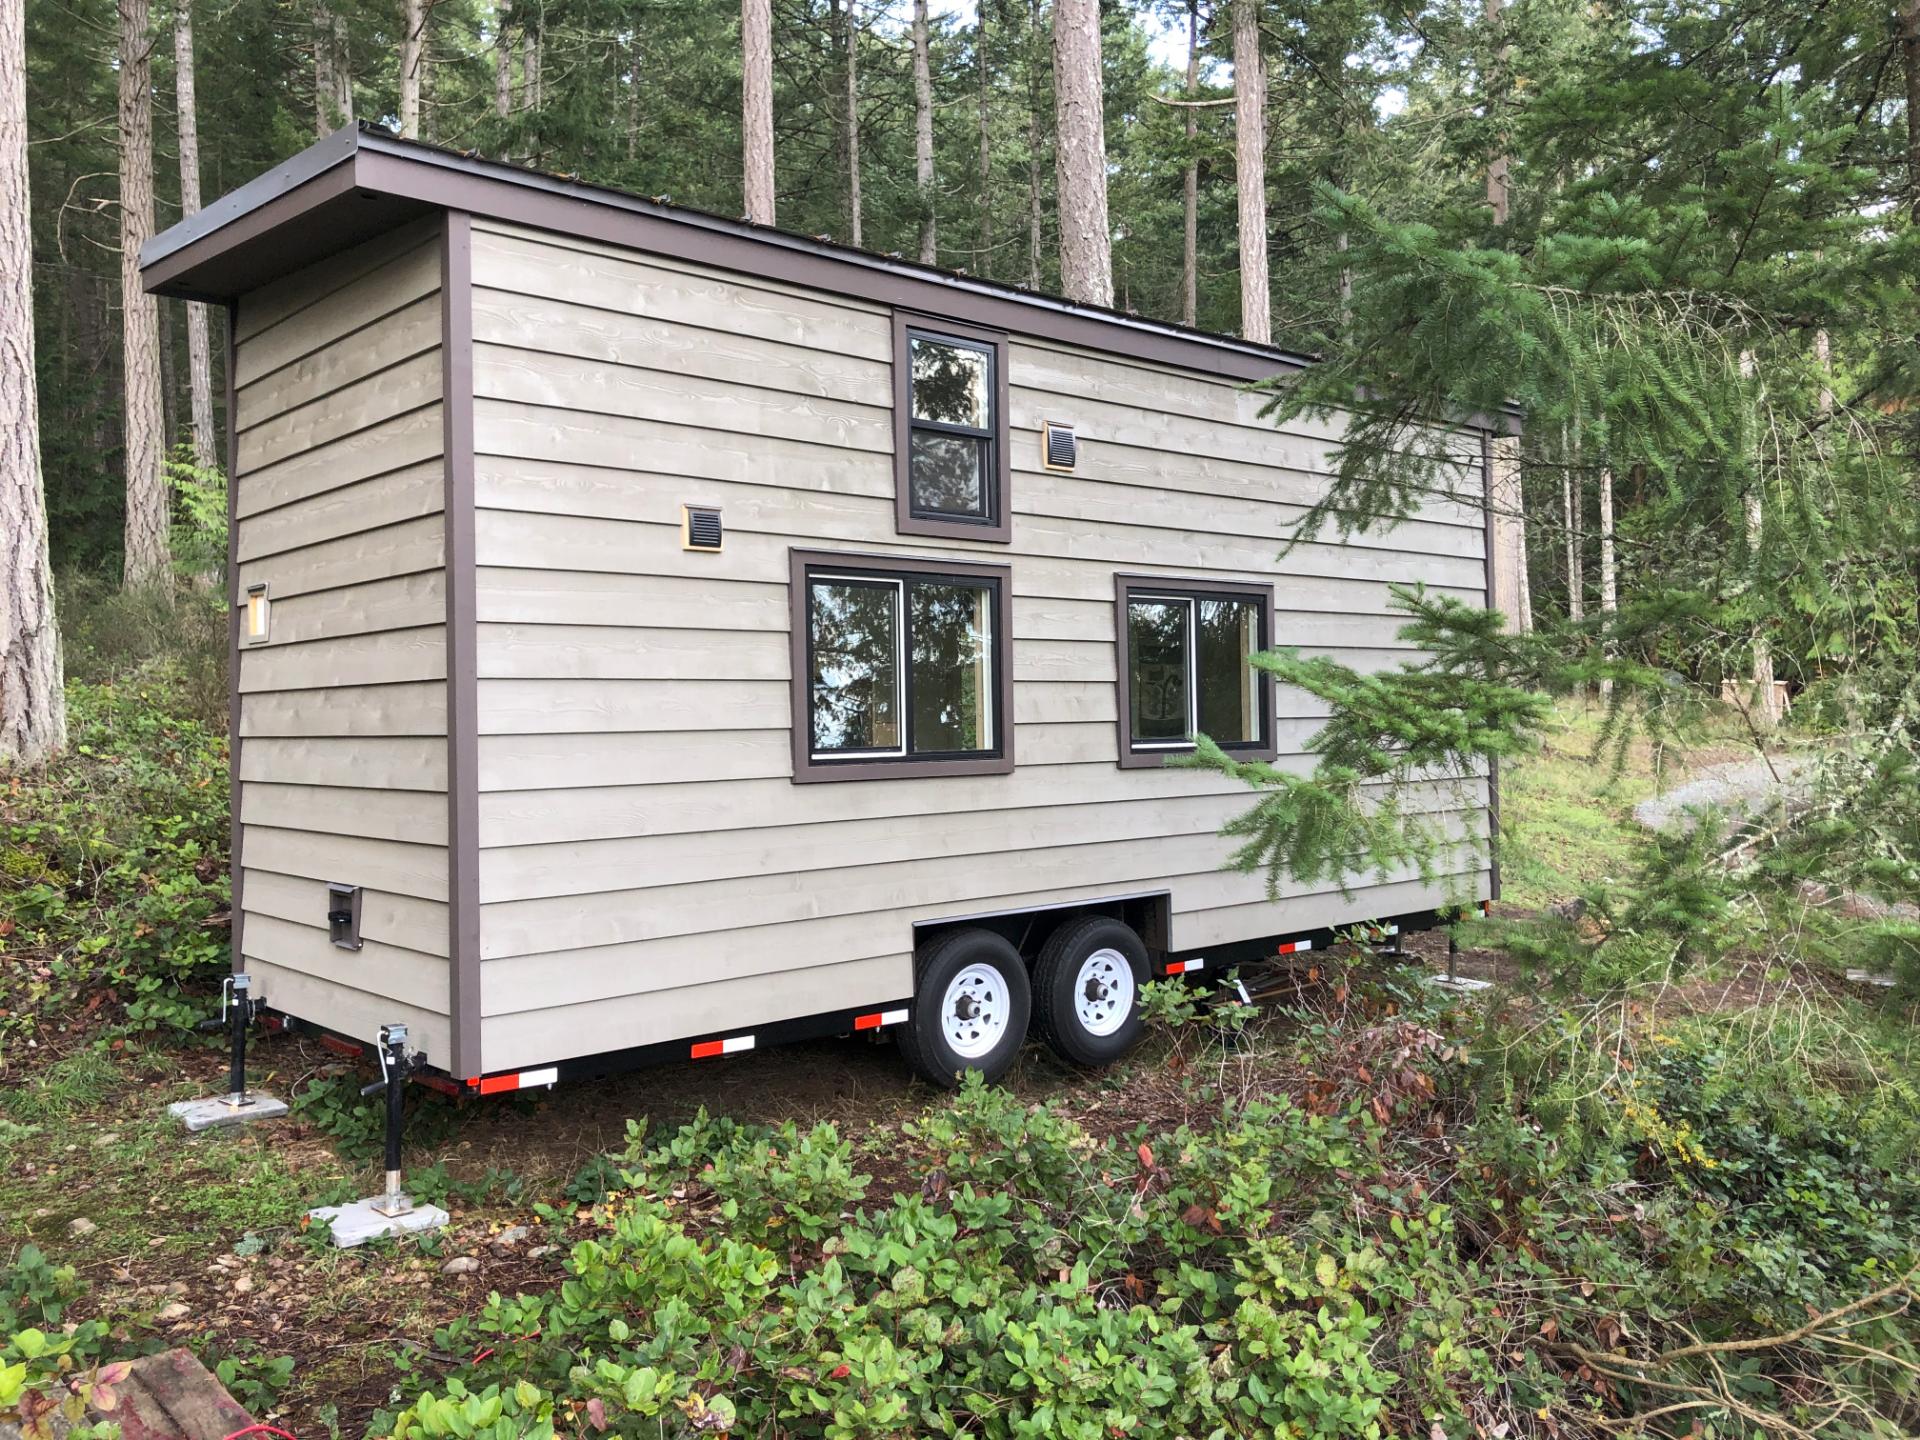 Rear Exterior View - Arbutus 24 by Artelle Tiny Homes